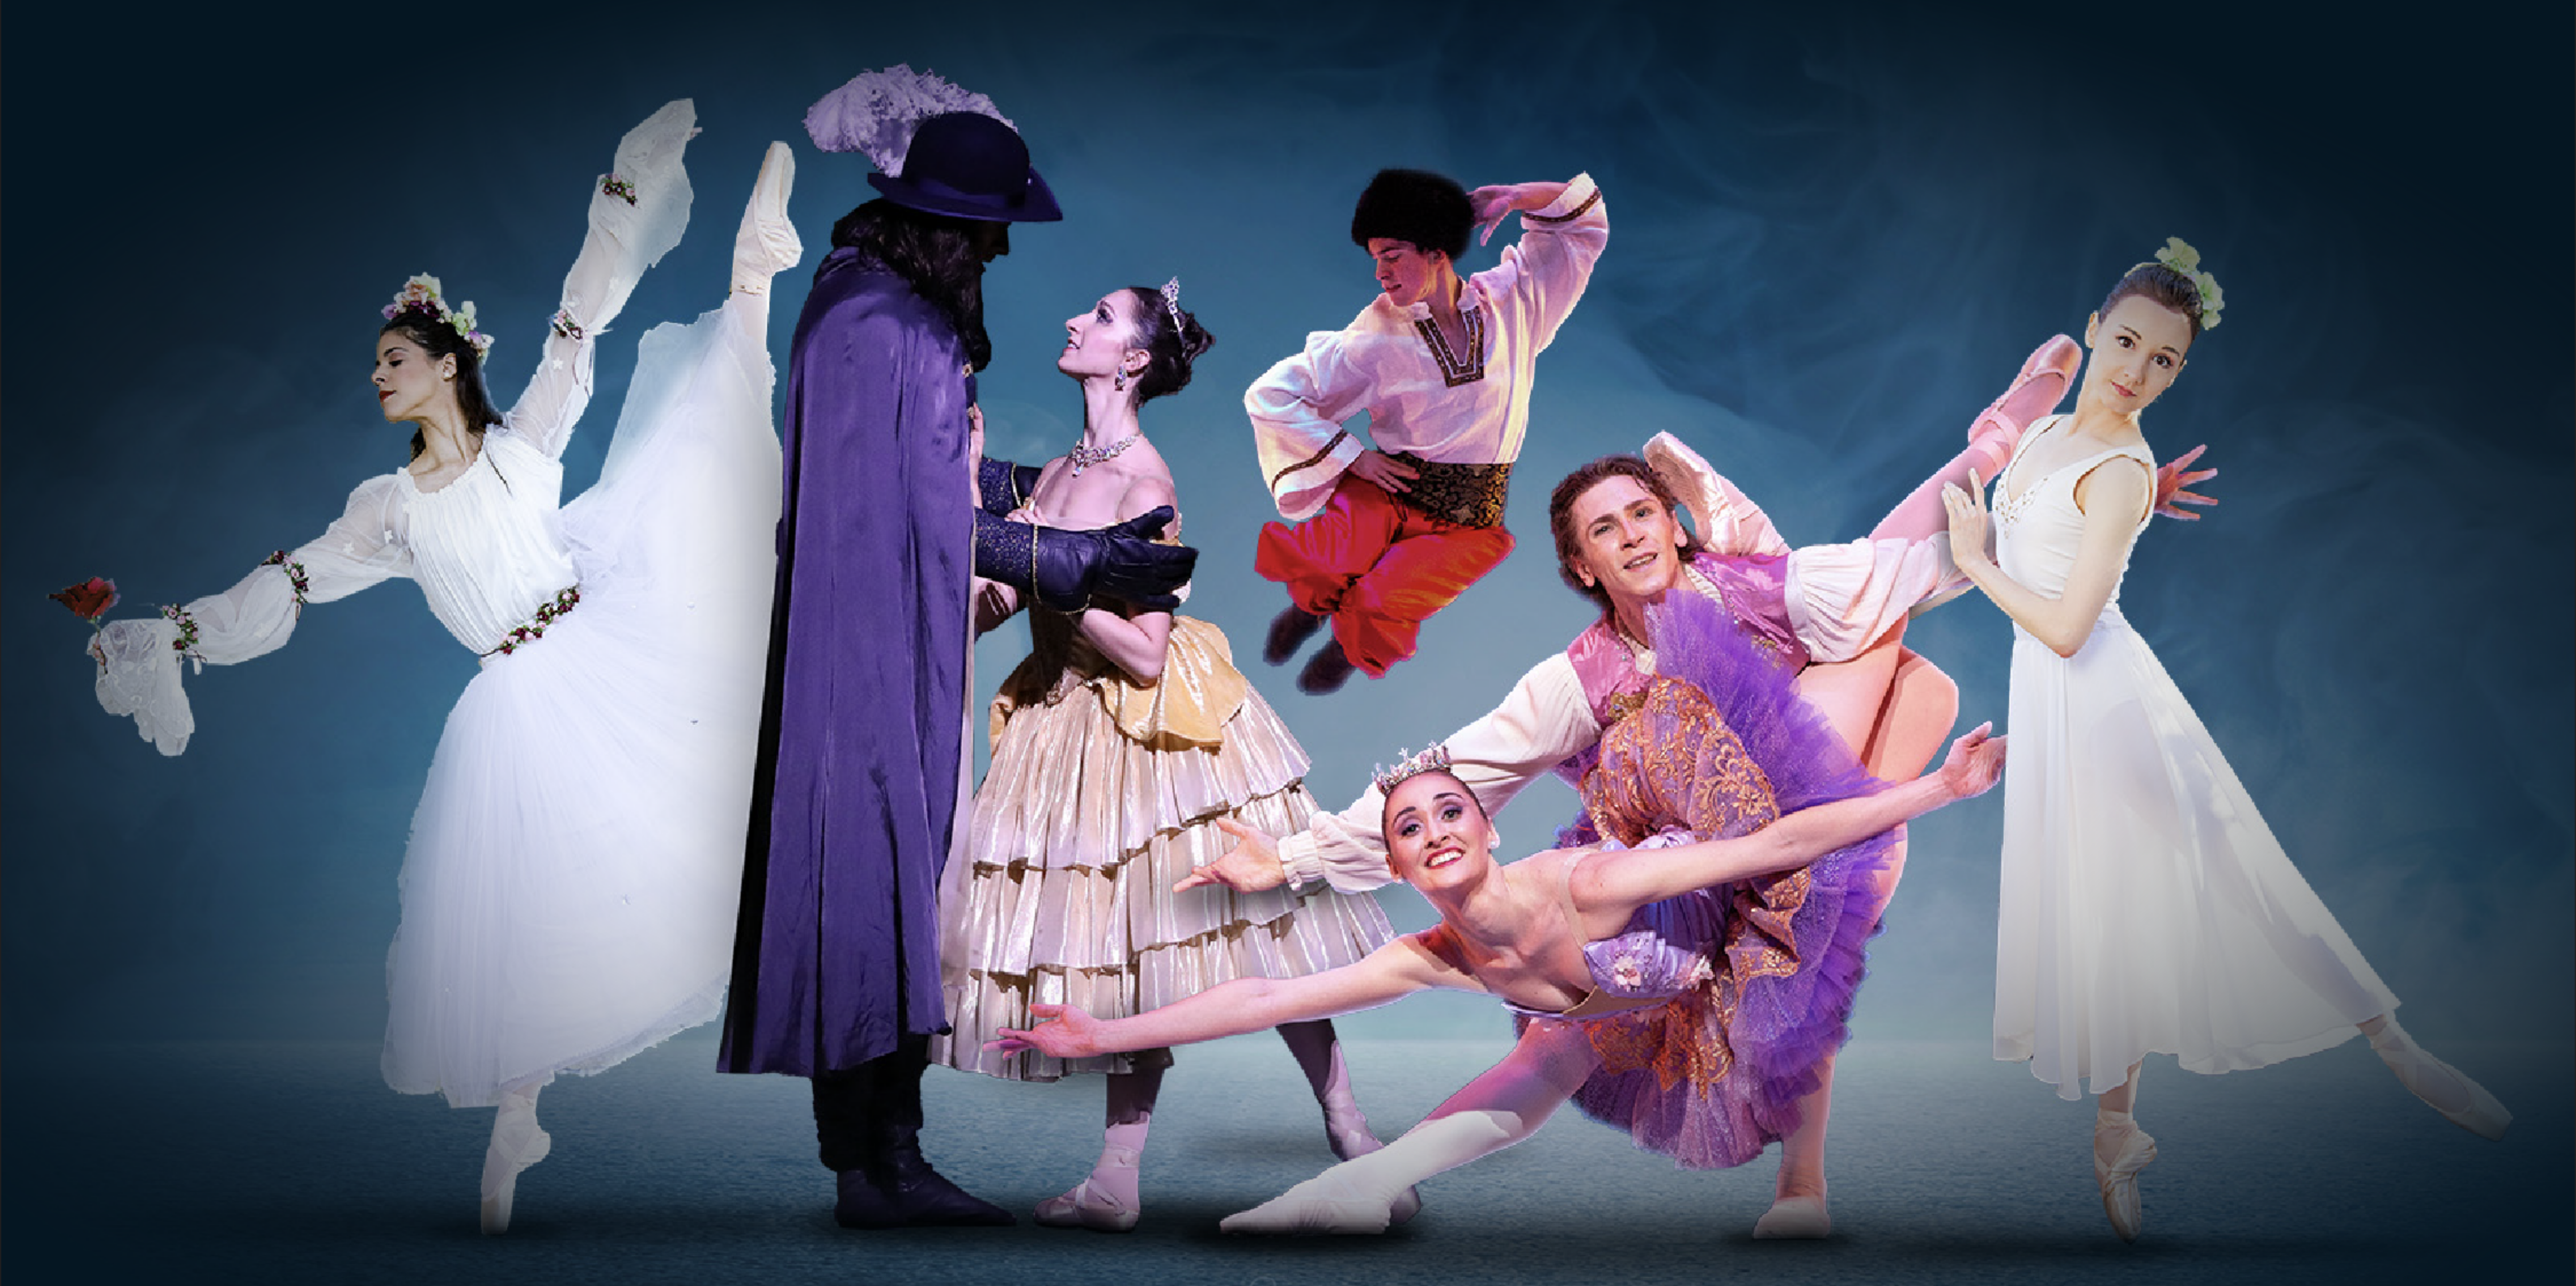 The image is a collage of ballet dancers from the shows that will be in the Ballet San Antonio season this year.